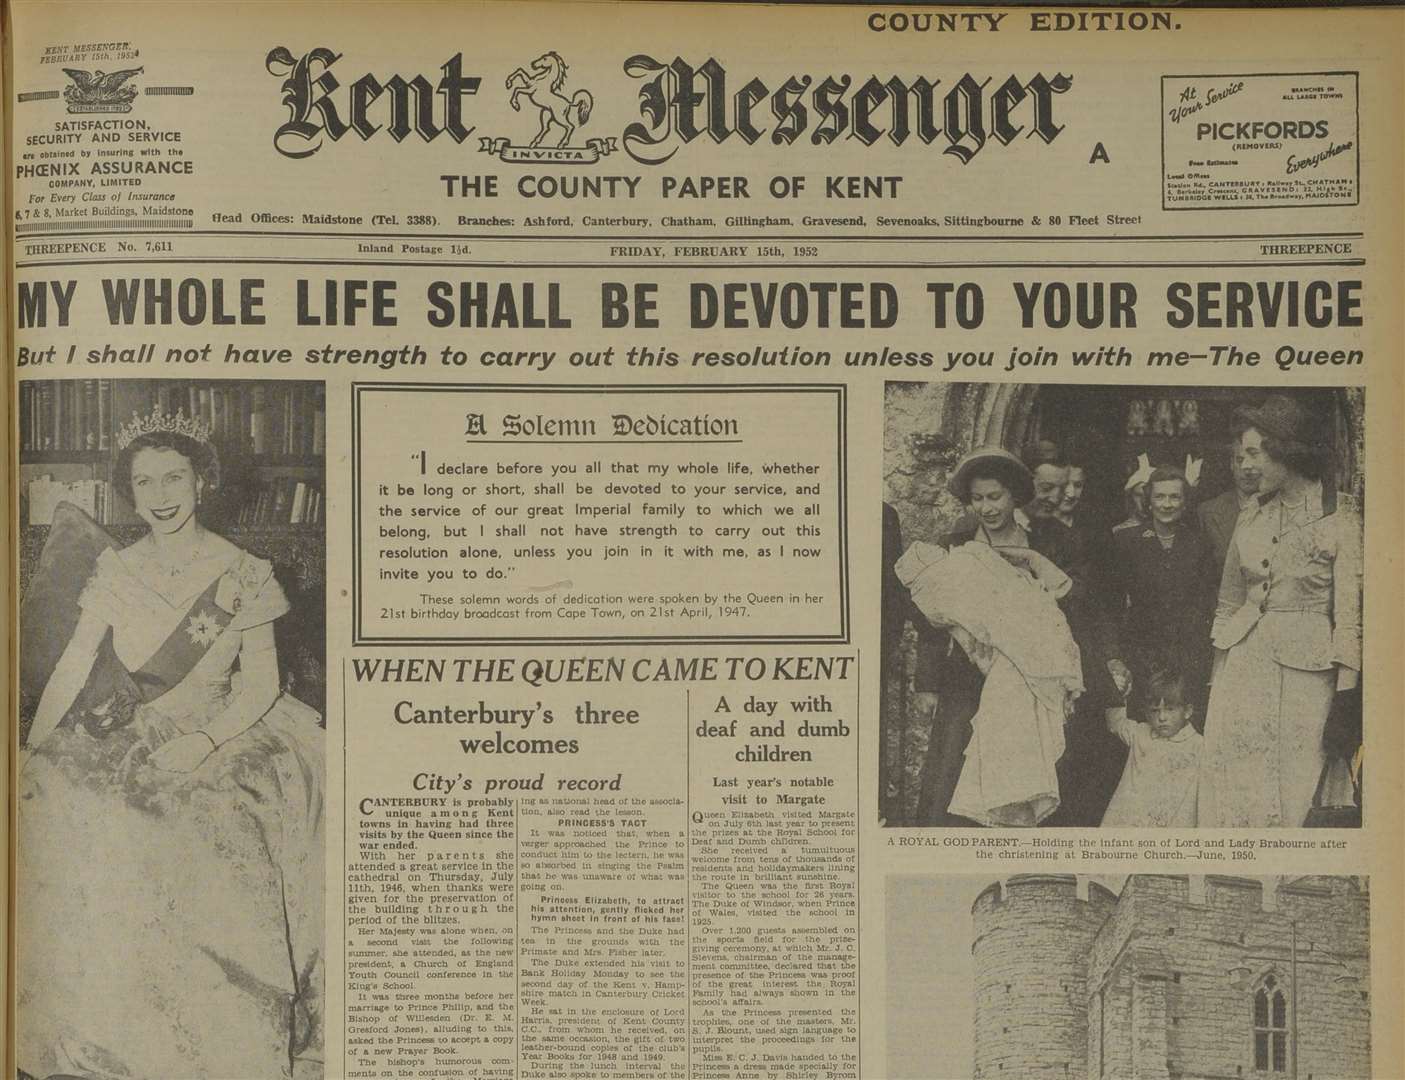 The Kent Messenger's coverage on February 15, 1952, of the new Queen and her previous visits to the county